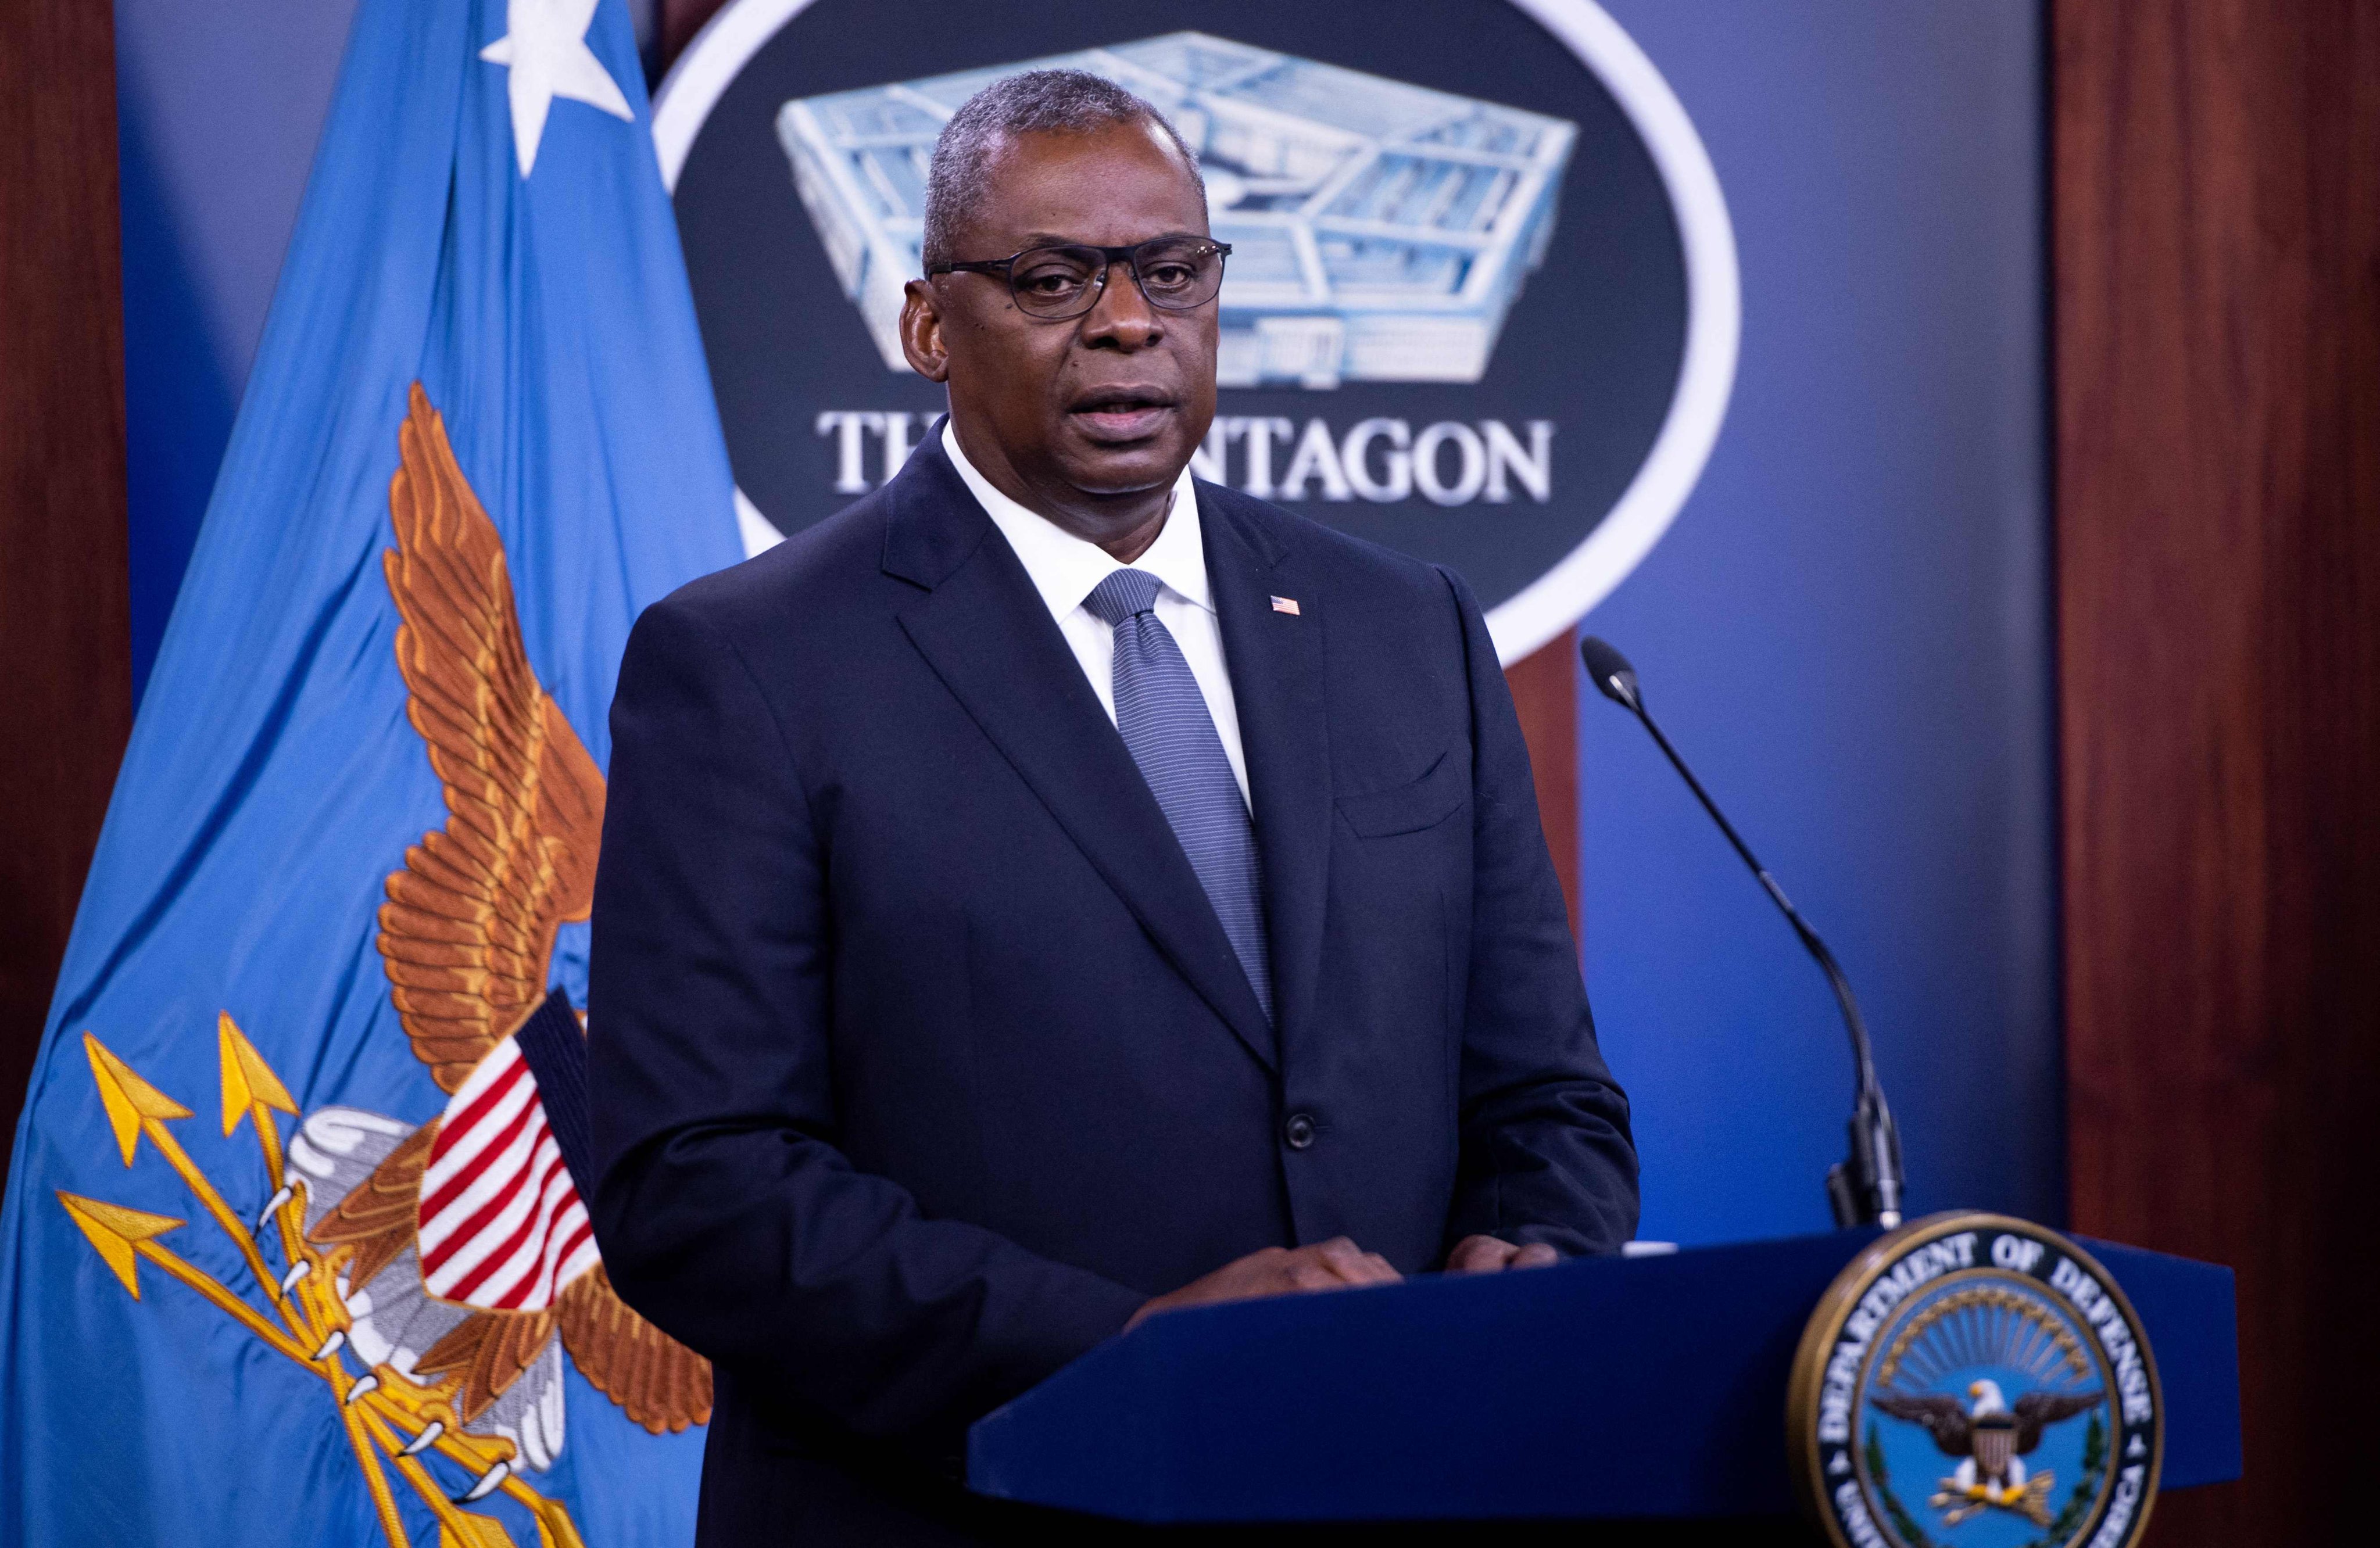 US Defence Secretary Lloyd Austin III at the Pentagon on September 1, 2021. The US carried out strikes on three sites used by Iran-backed forces in Iraq on Monday after an attack wounded American troops earlier in the day. Photo: AFP